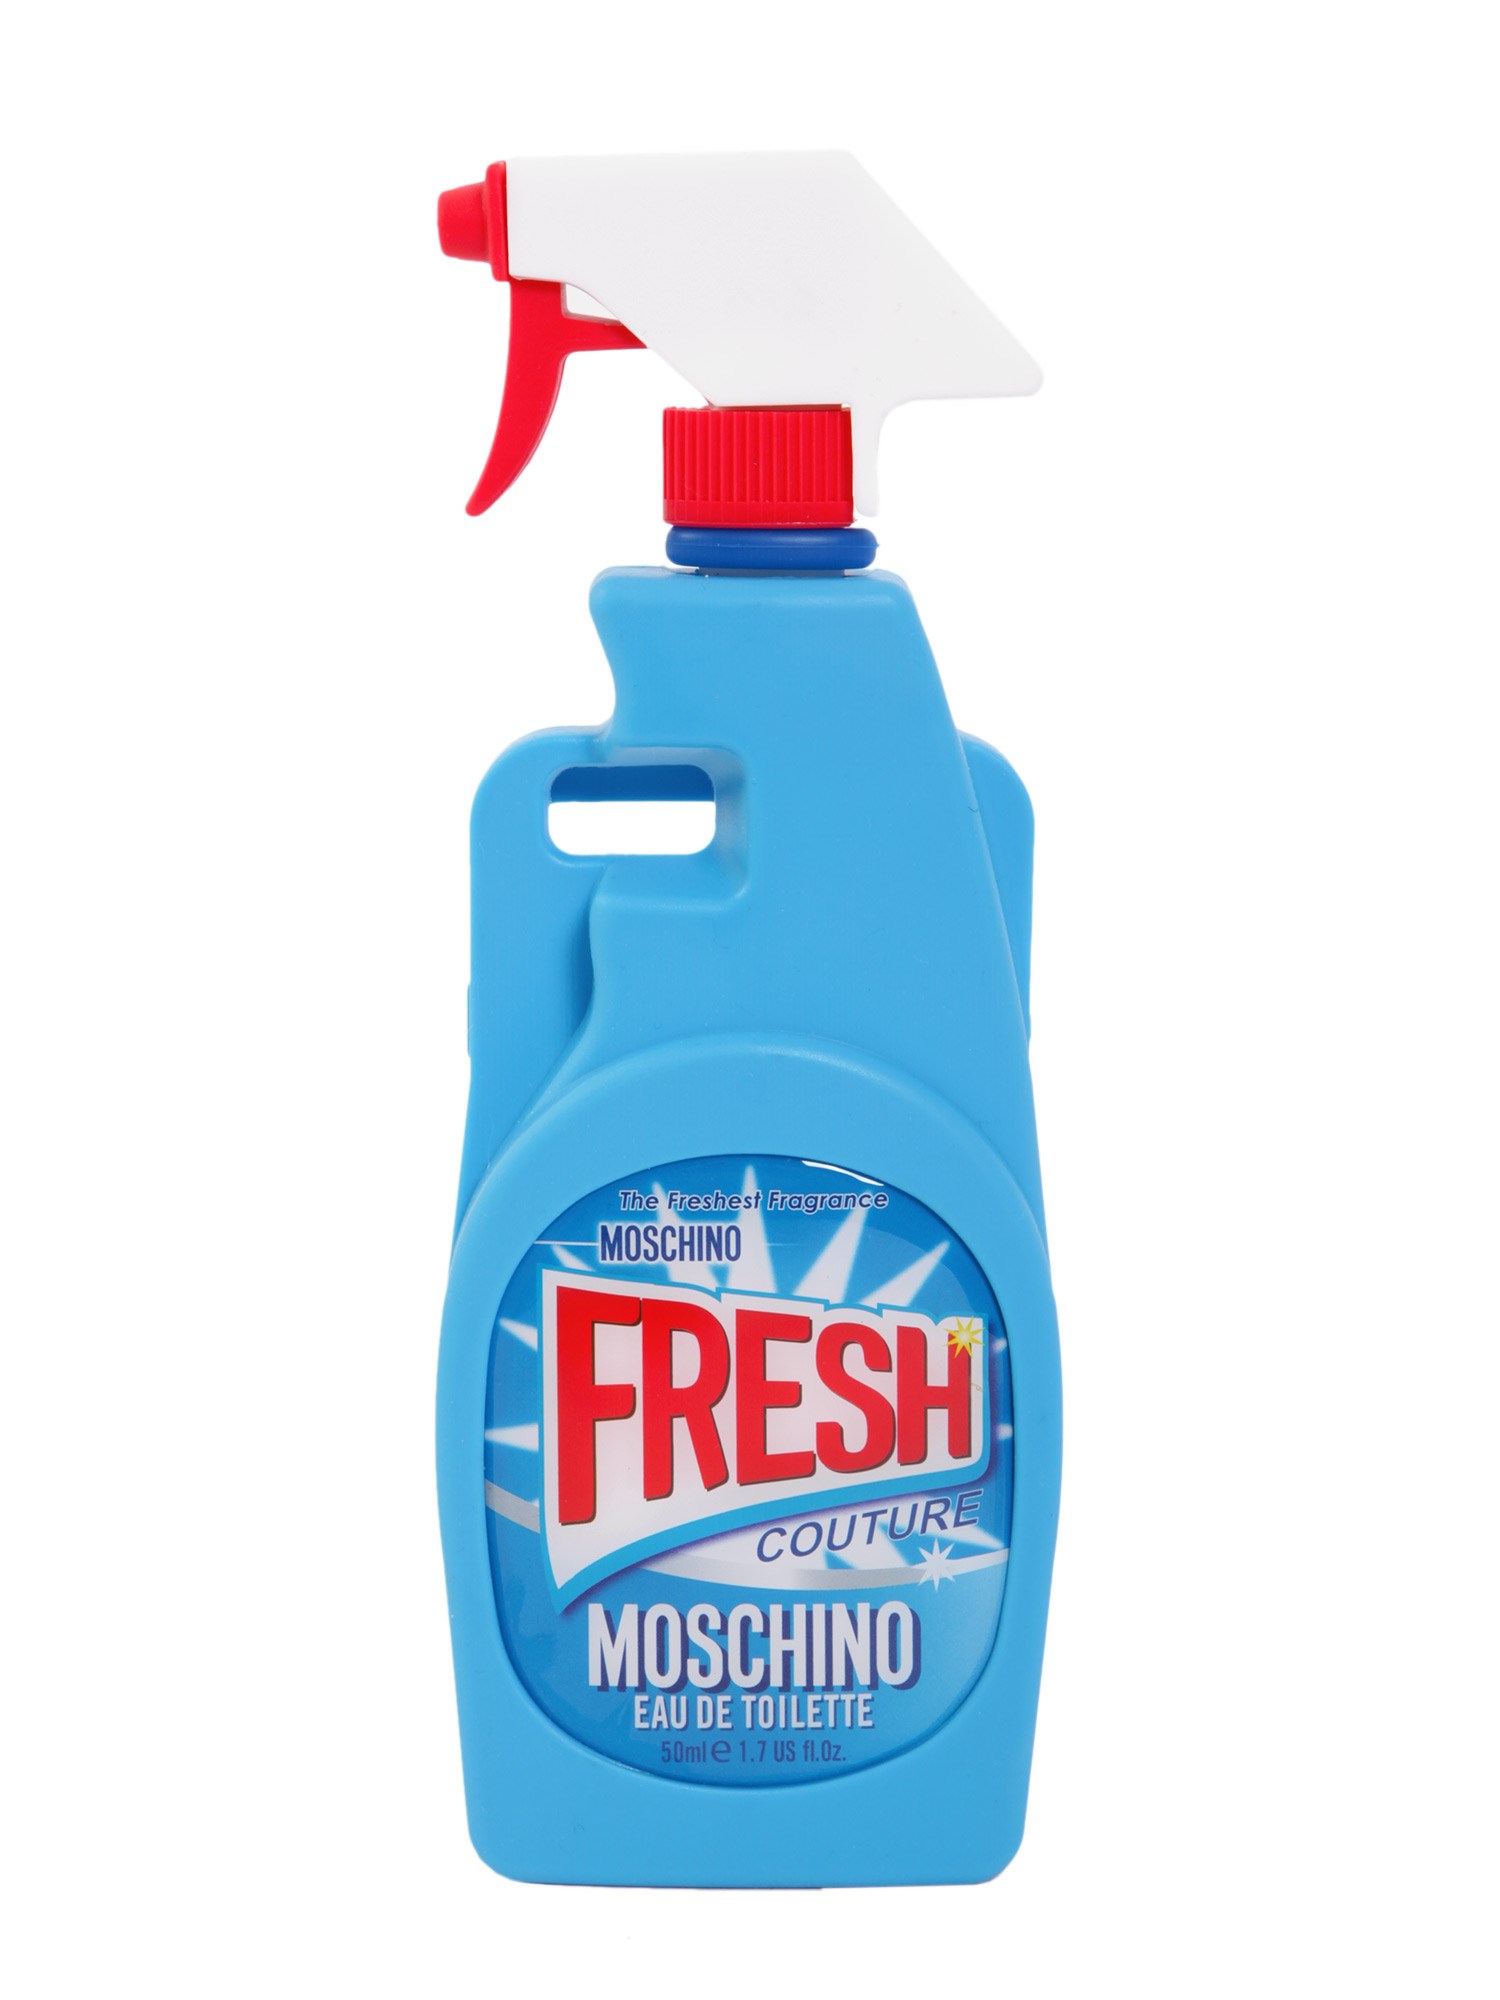 moschino capsule collection ss 16 moschino capsule collection ss 16 i phone 6 cover